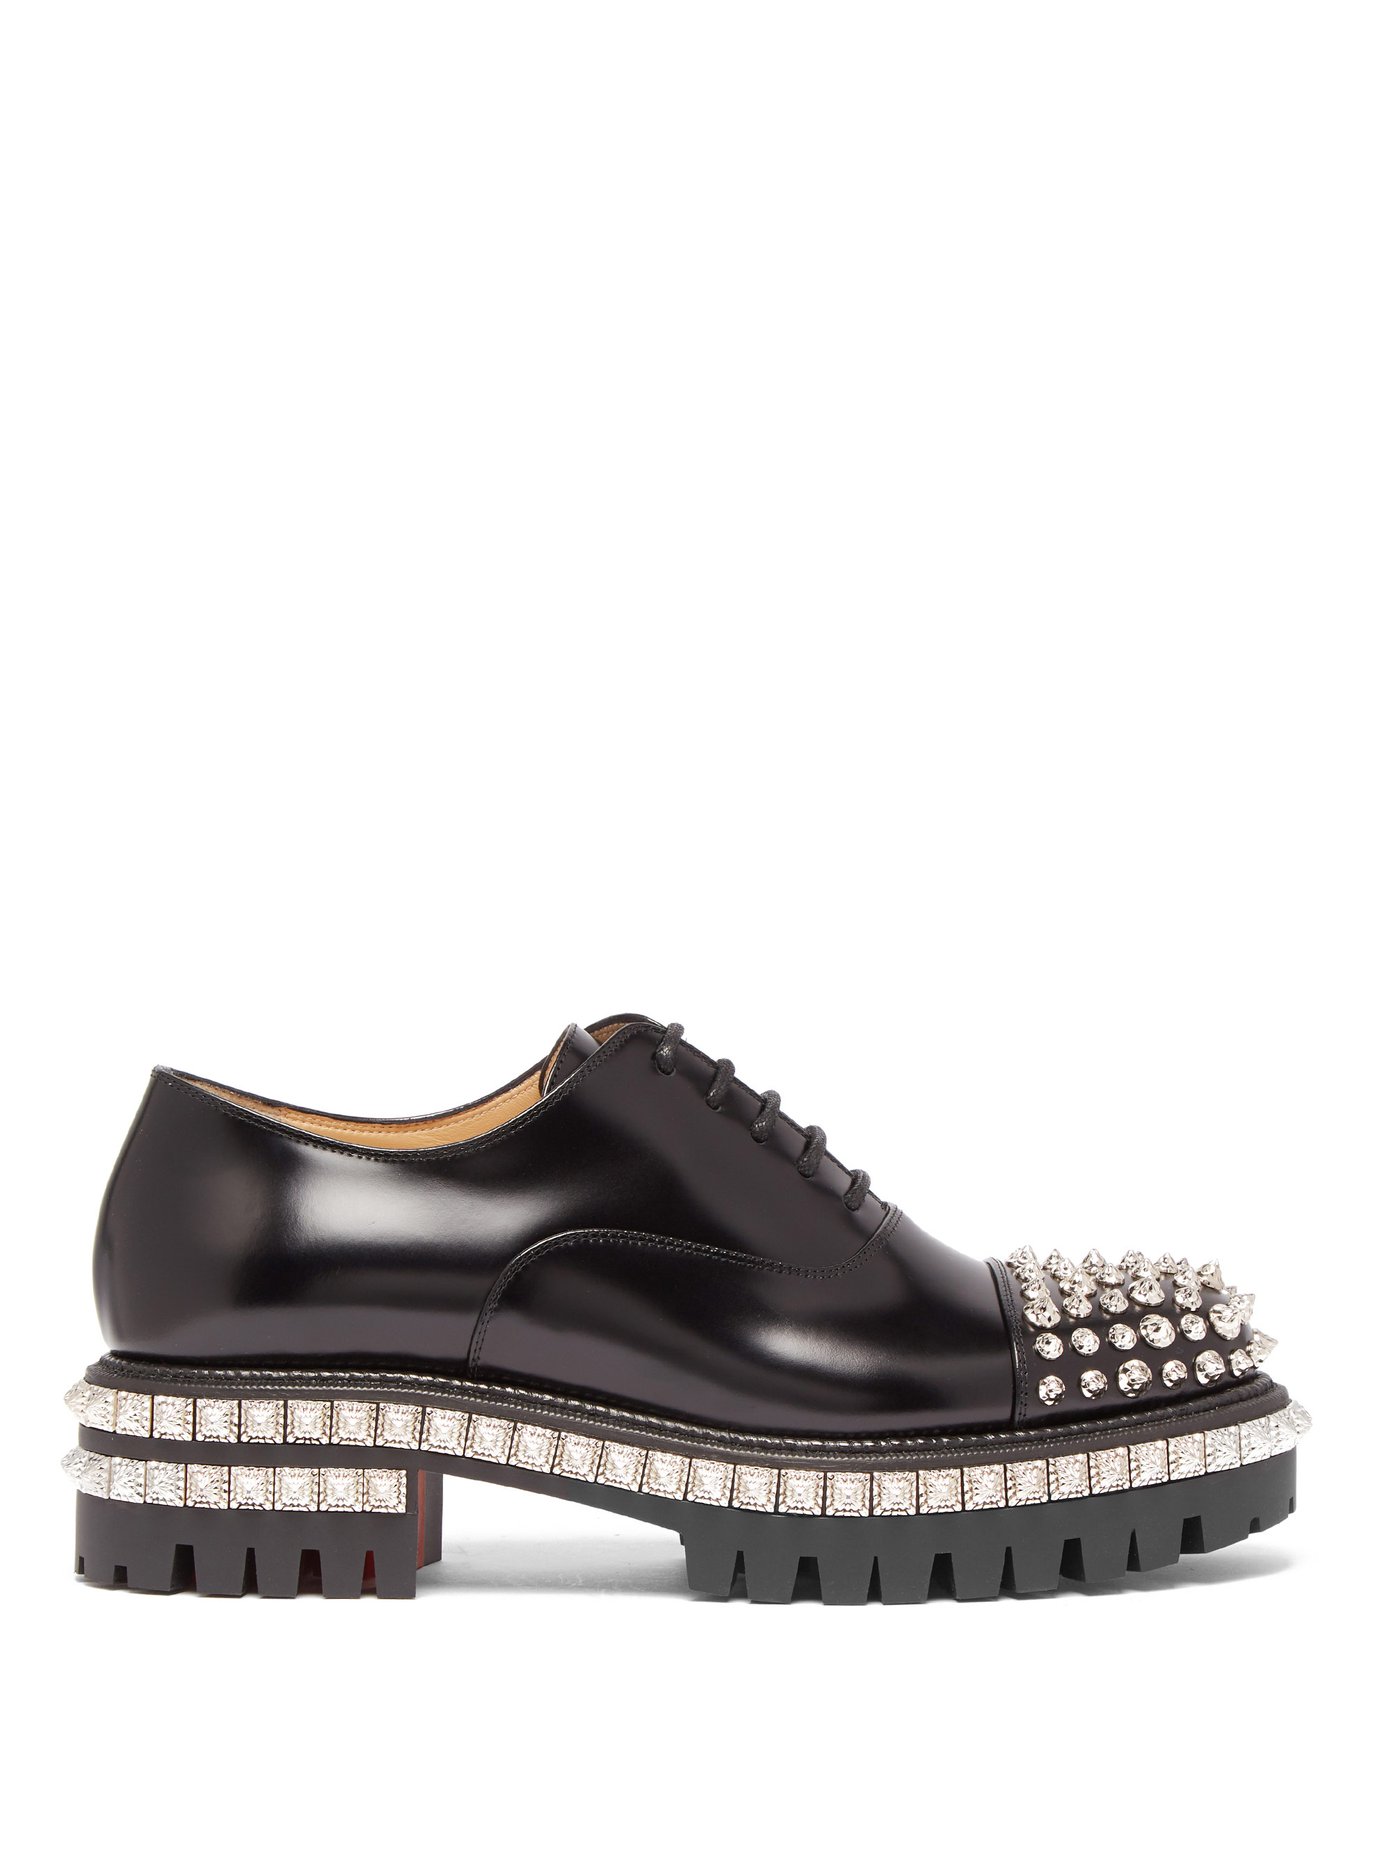 studded louboutin shoes